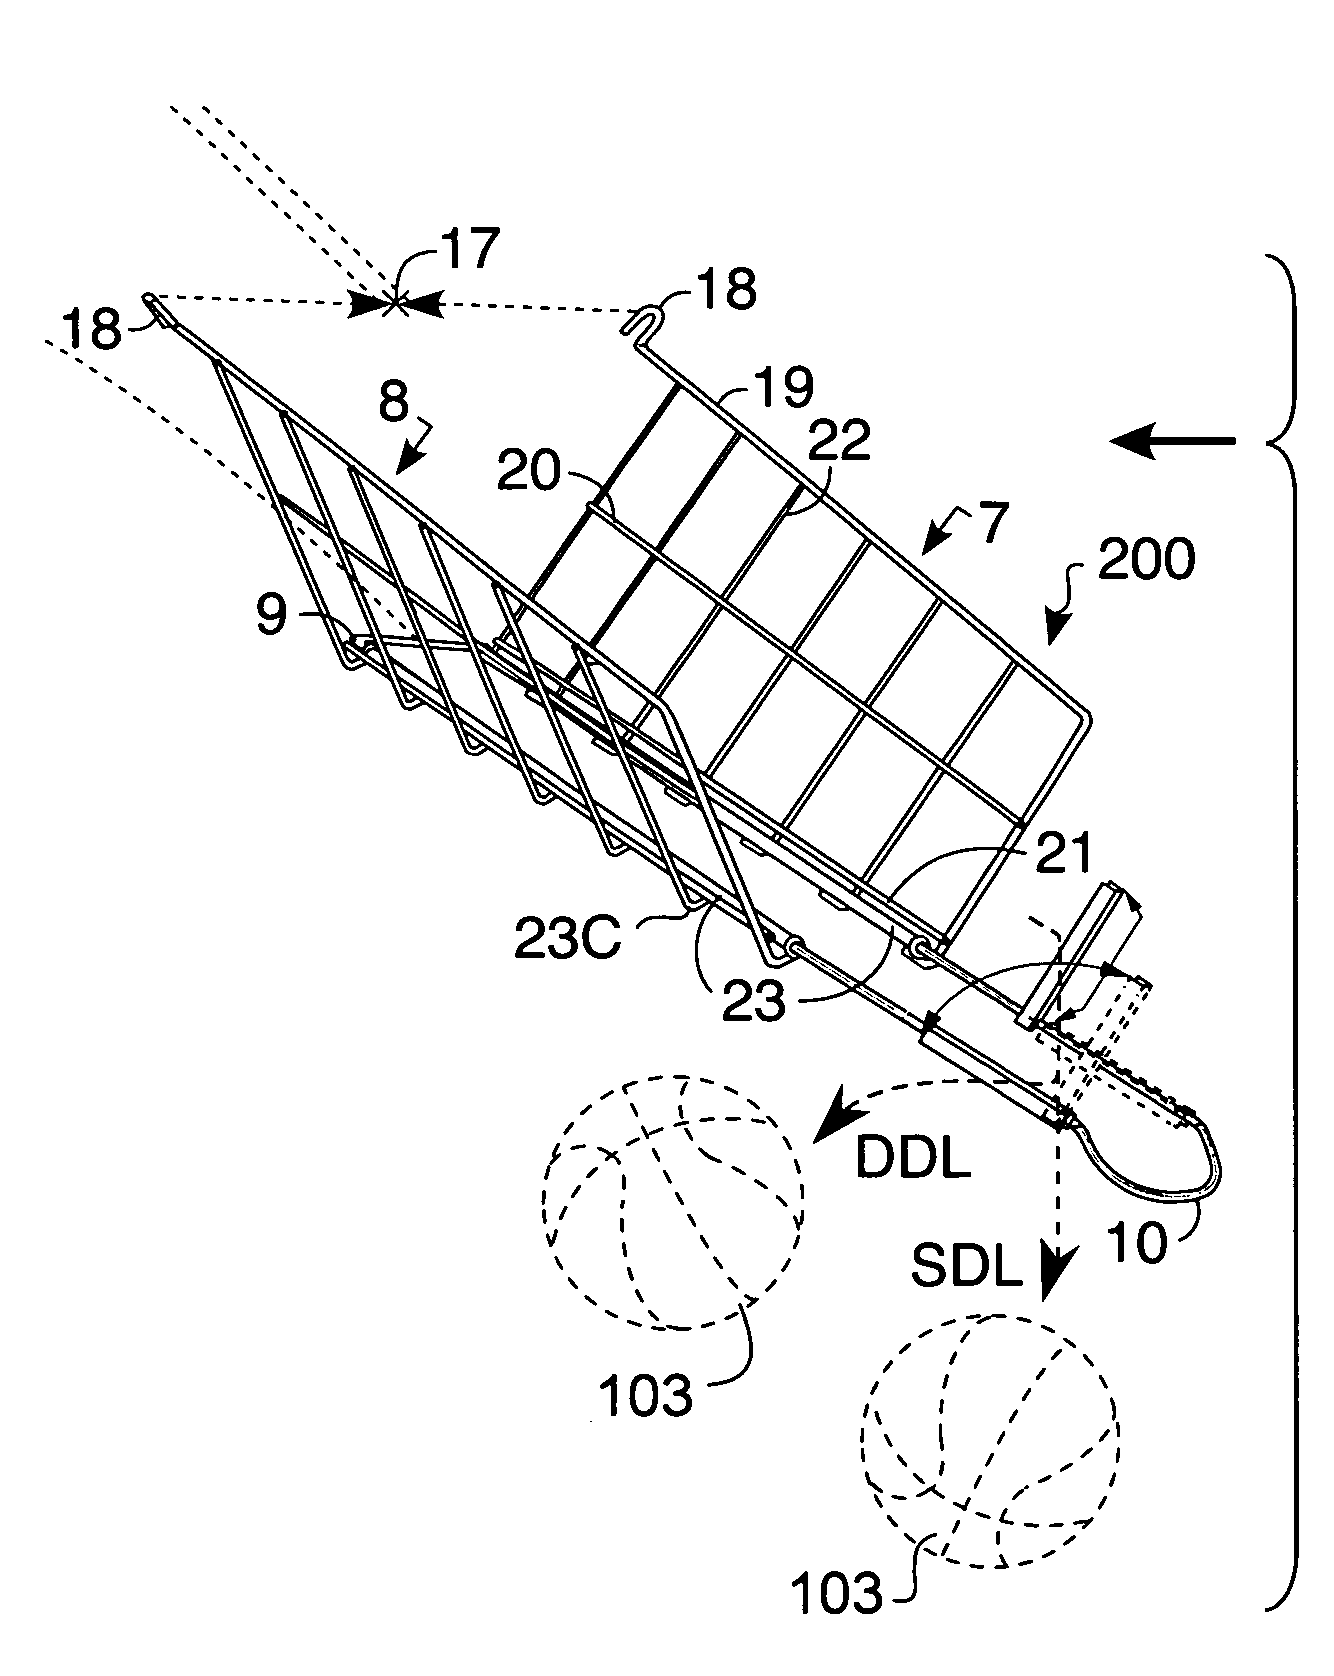 Basketball return apparatus with track extender and deflector